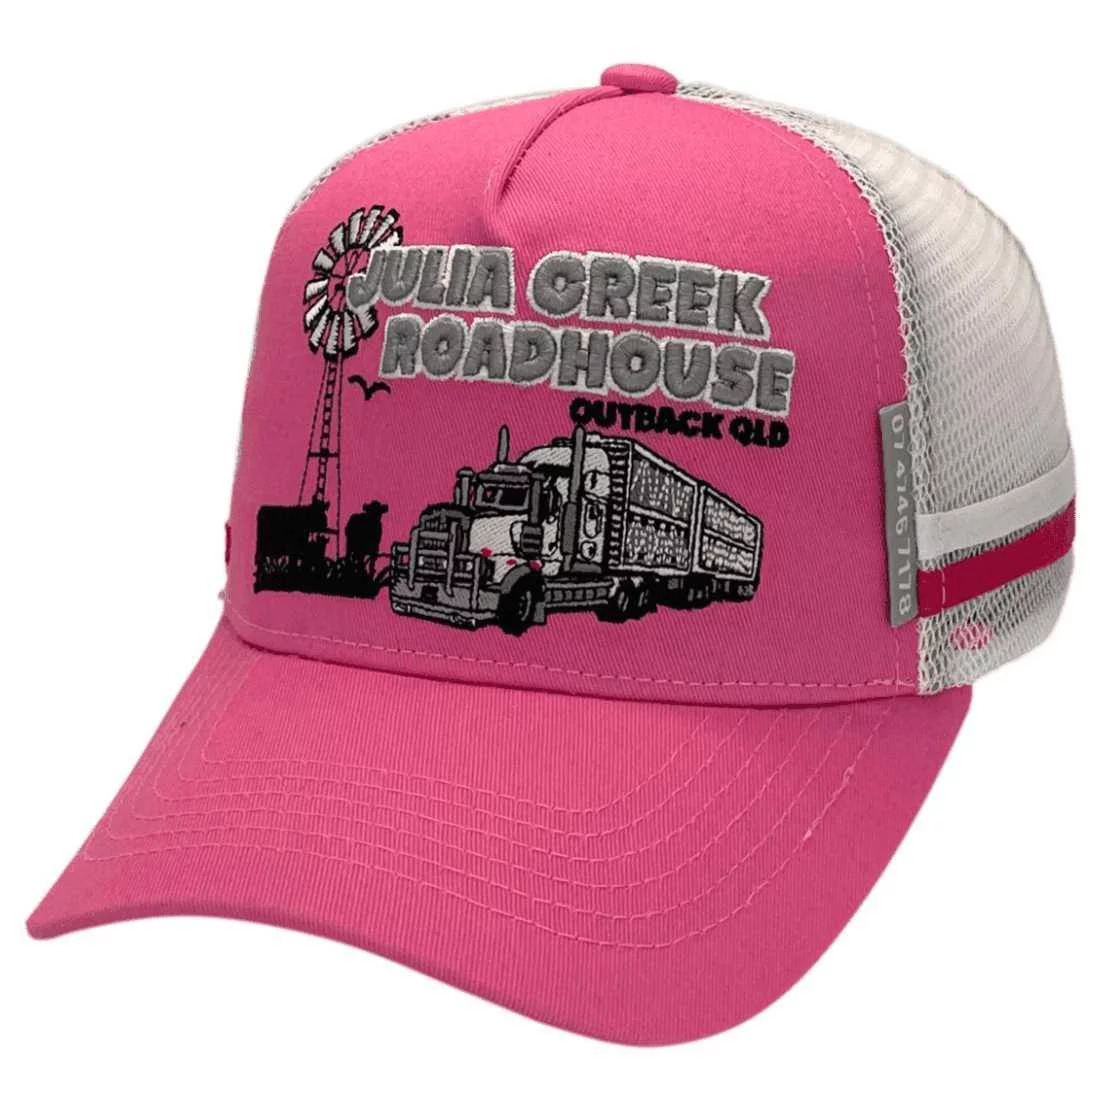 Julia Creek Roadhouse Qld LP Original Midrange Aussie Trucker Hat with Australian Head Fit Crown Sizing and Double Sidebands Pink